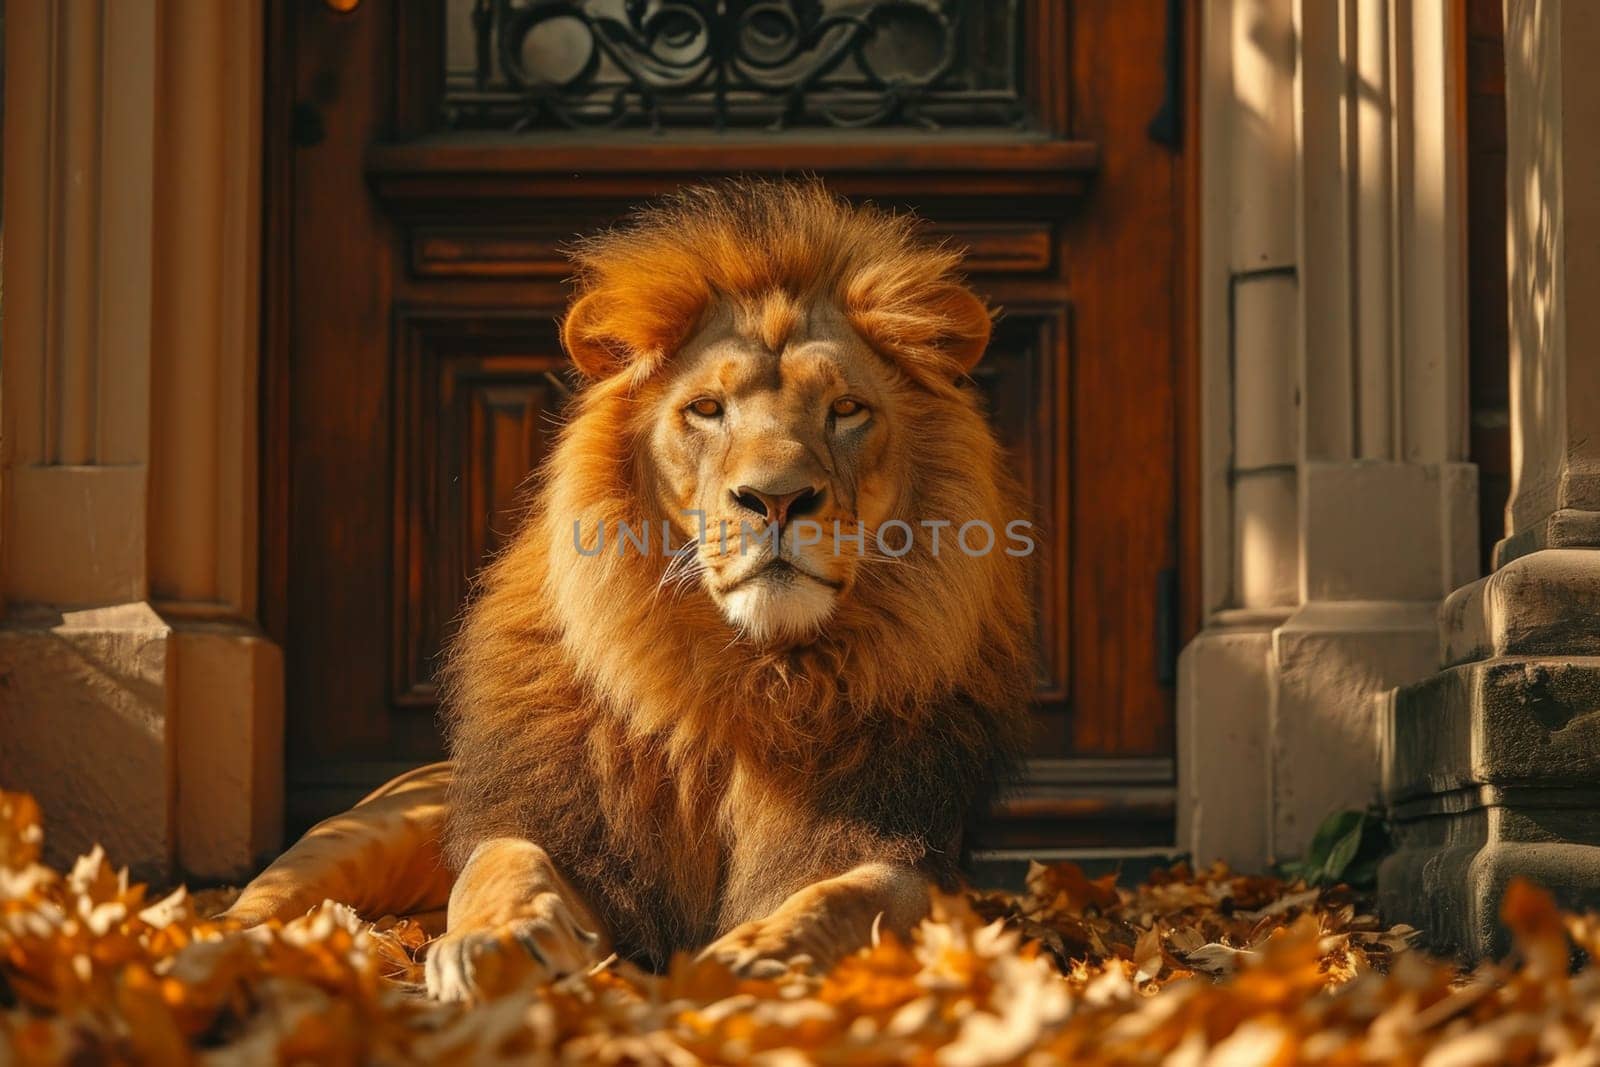 A big lion is sitting guarding the front door of the house.